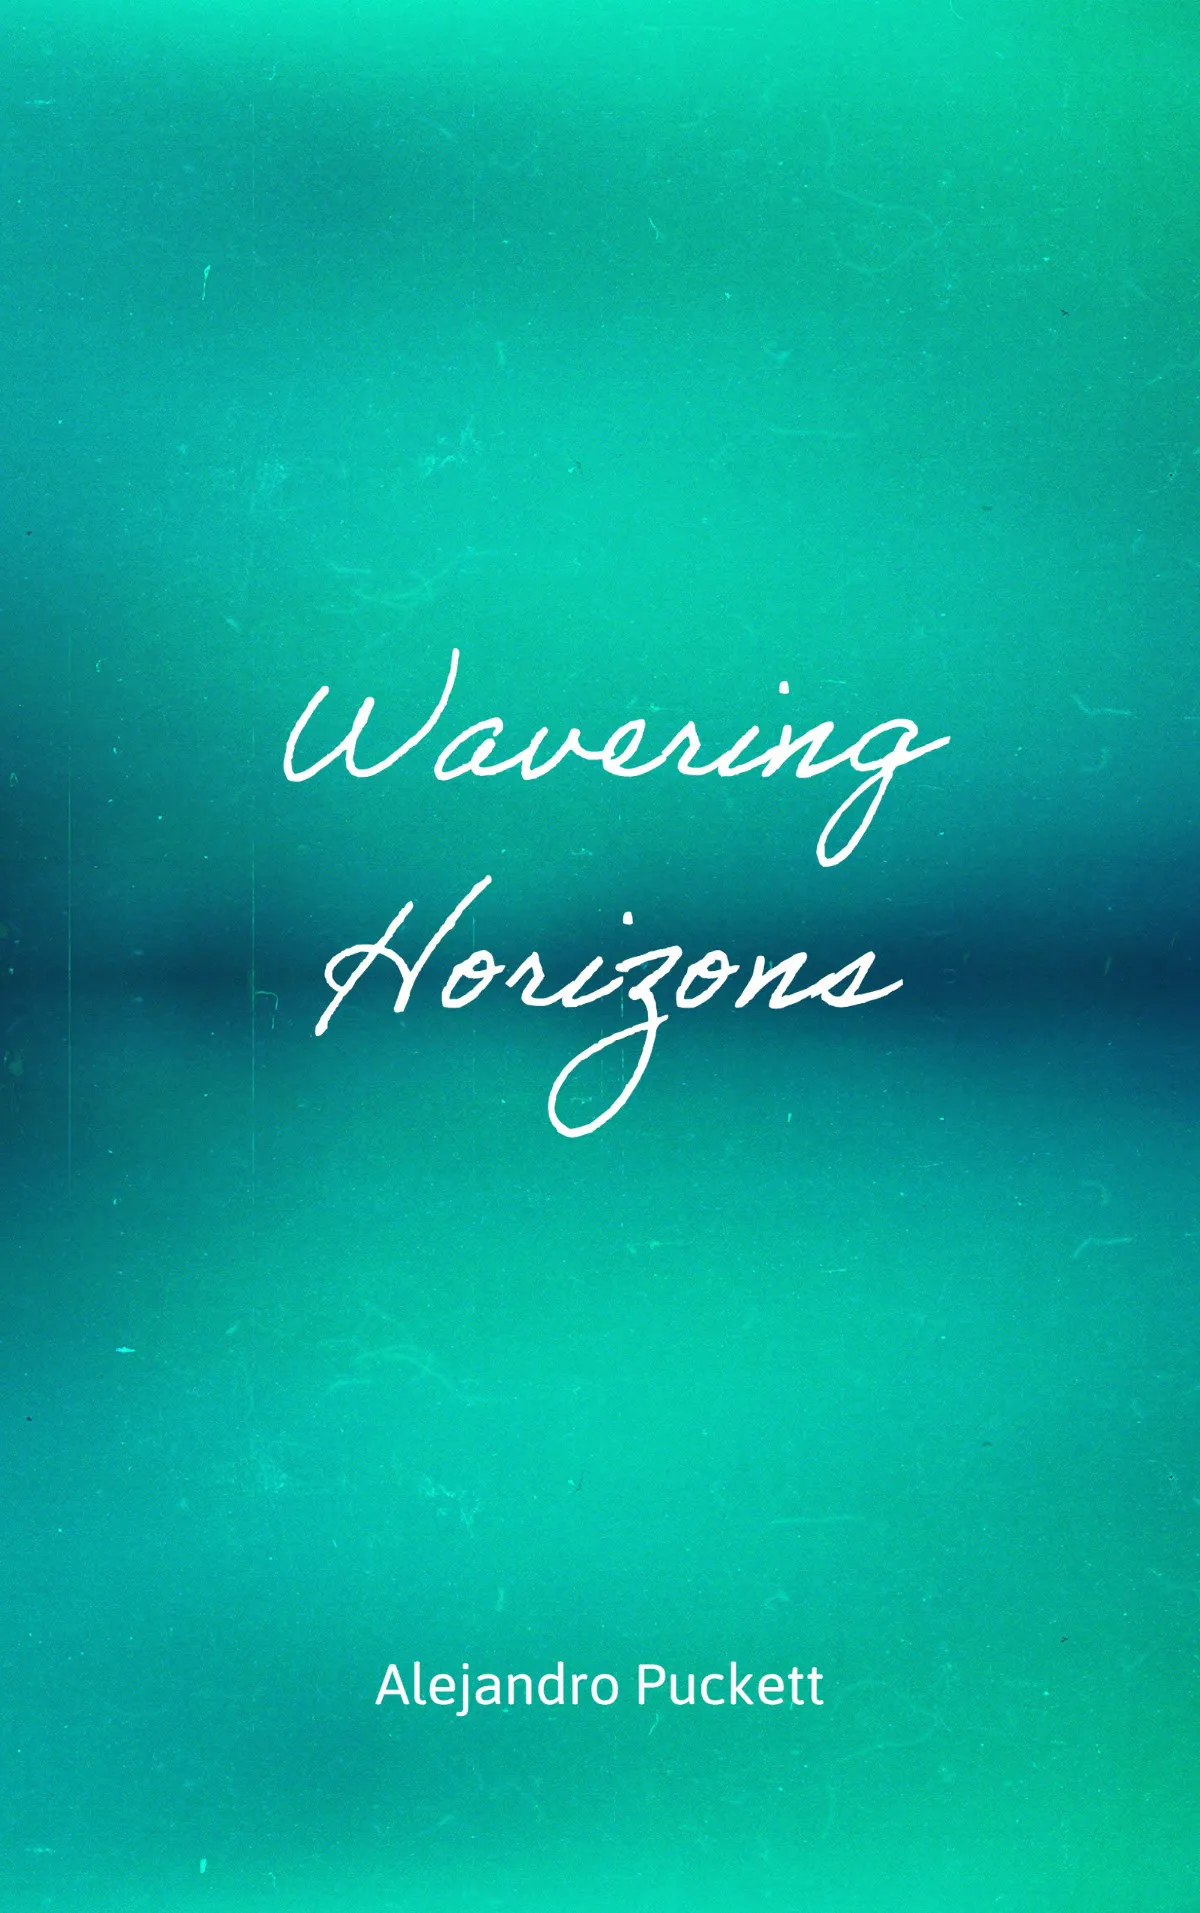 Green Blue Wavering Horizons Book Cover